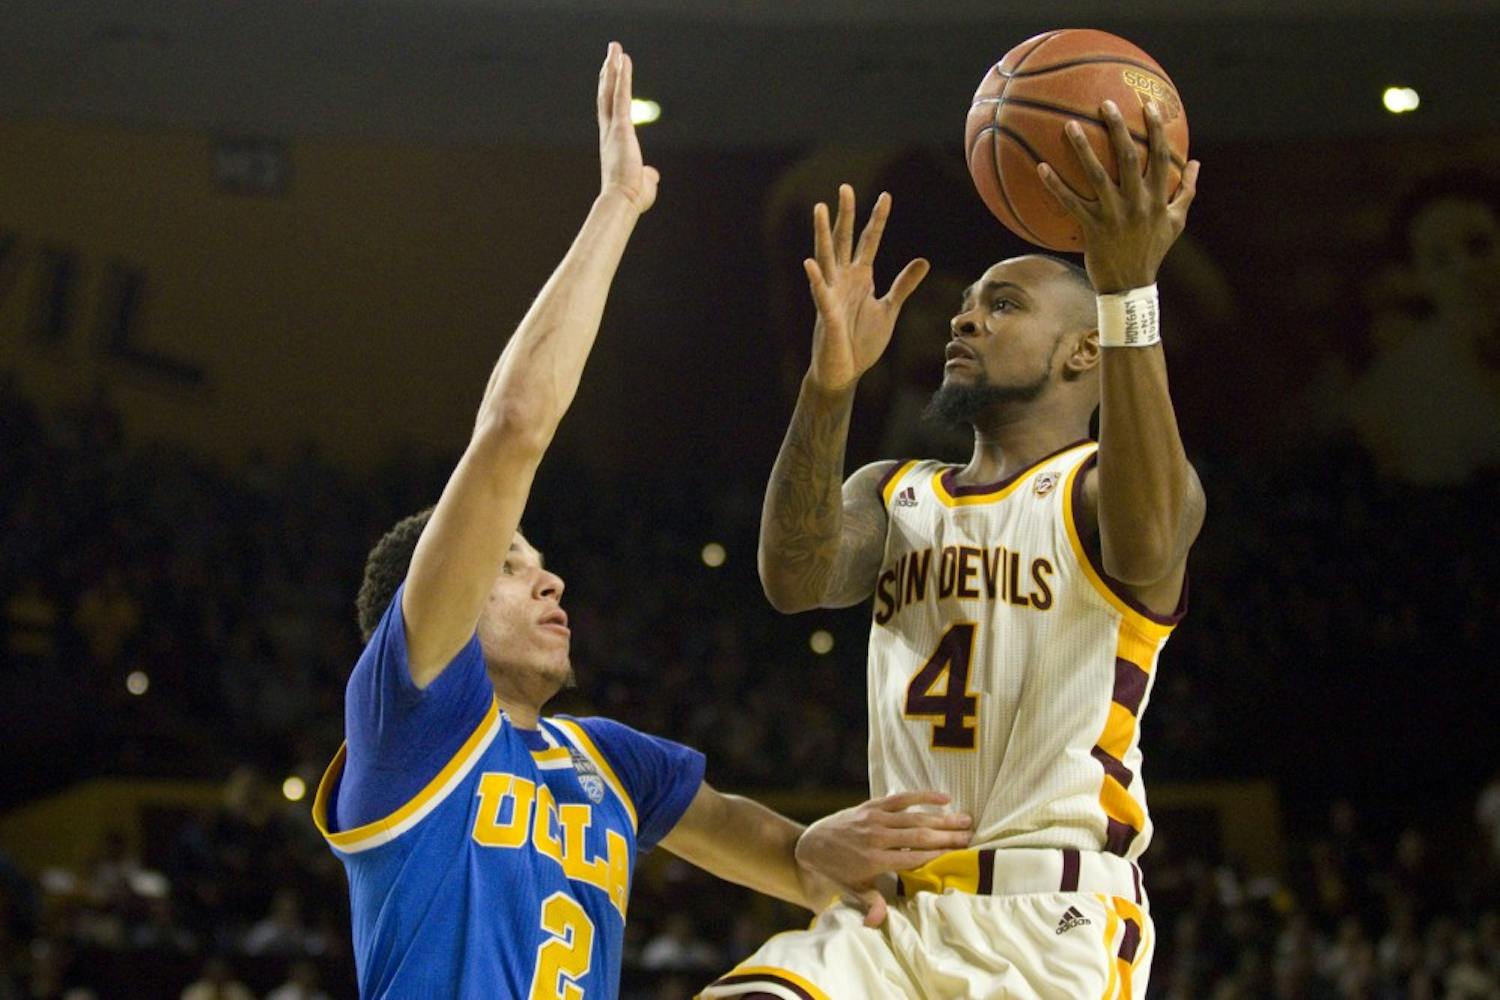 ASU senior guard Torian Graham (4) goes up for a layup with UCLA freshman guard Lonzo Ball (2) guarding during a men's basketball game versus the UCLA Bruins in Wells Fargo Arena in Tempe, Arizona on Thursday, Feb. 23, 2017. ASU lost the game 87-75. (Josh Orcutt/State Press) 